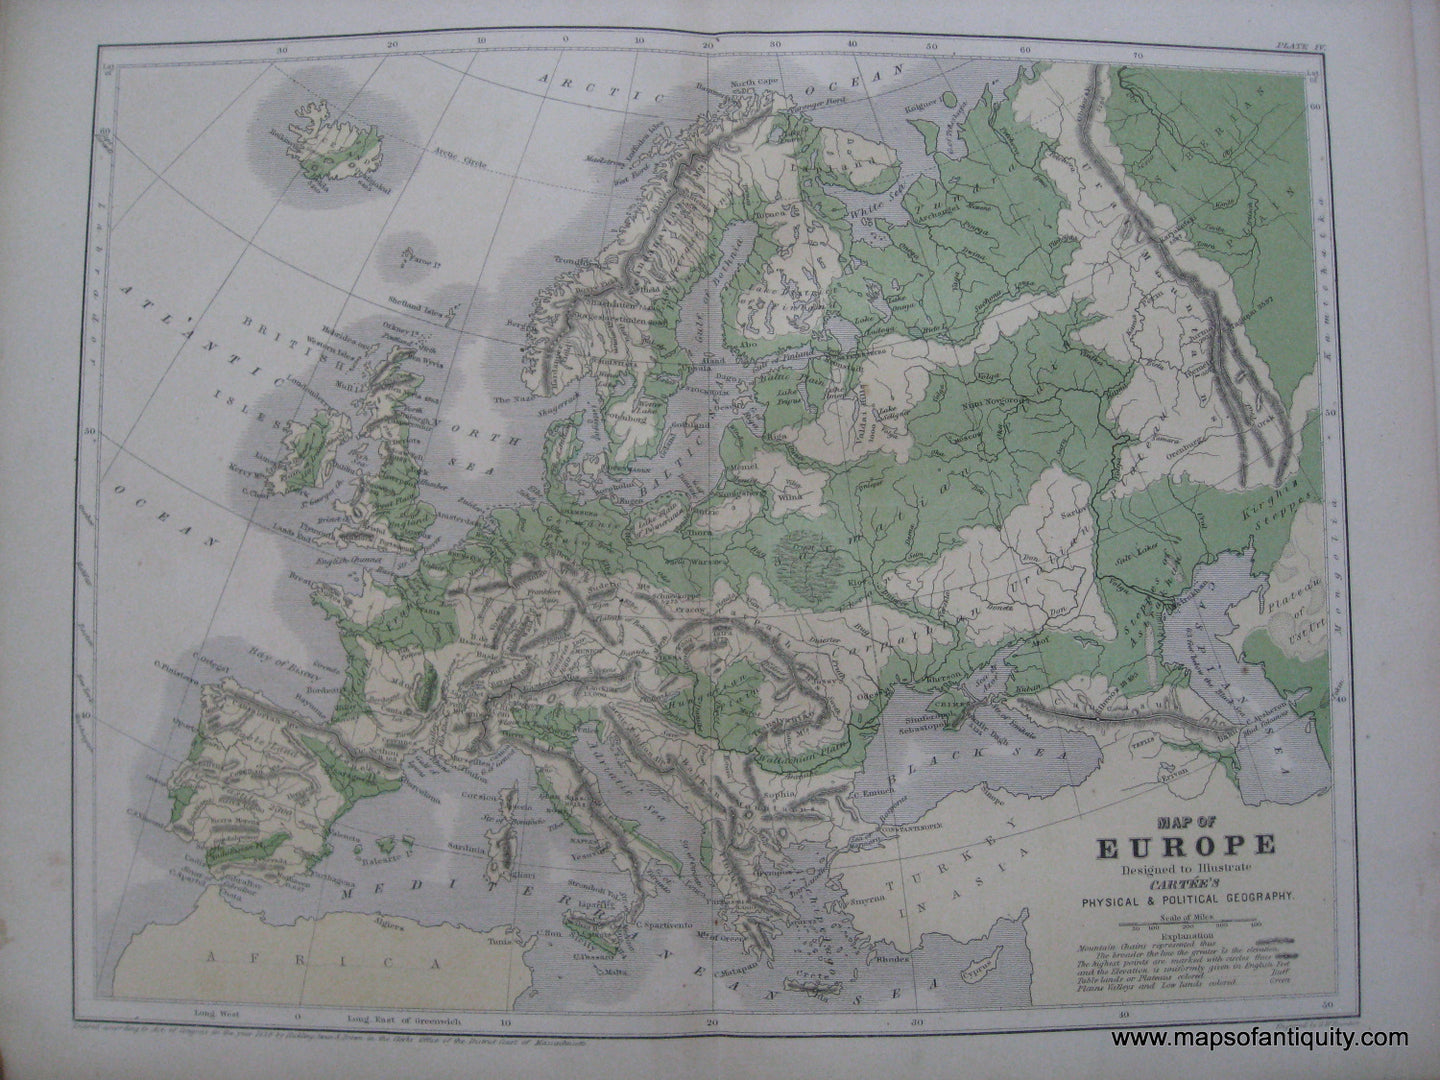 Antique-Hand-Colored-Map-Map-of-Europe-Europe-Europe-General-1856-Cartee-Maps-Of-Antiquity